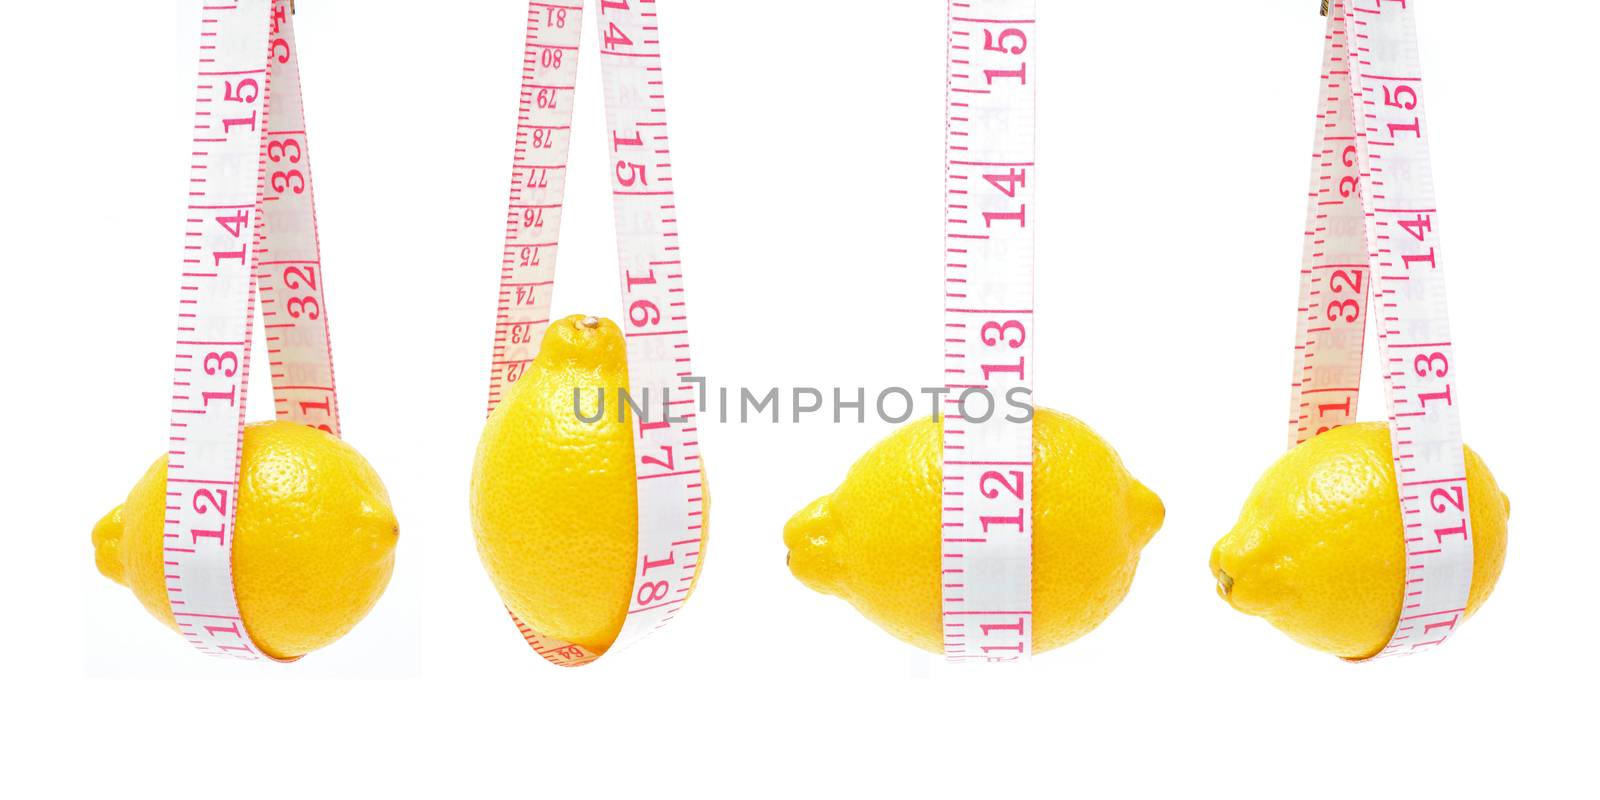 Lemon and Tape measures isolated on white background by myyaym